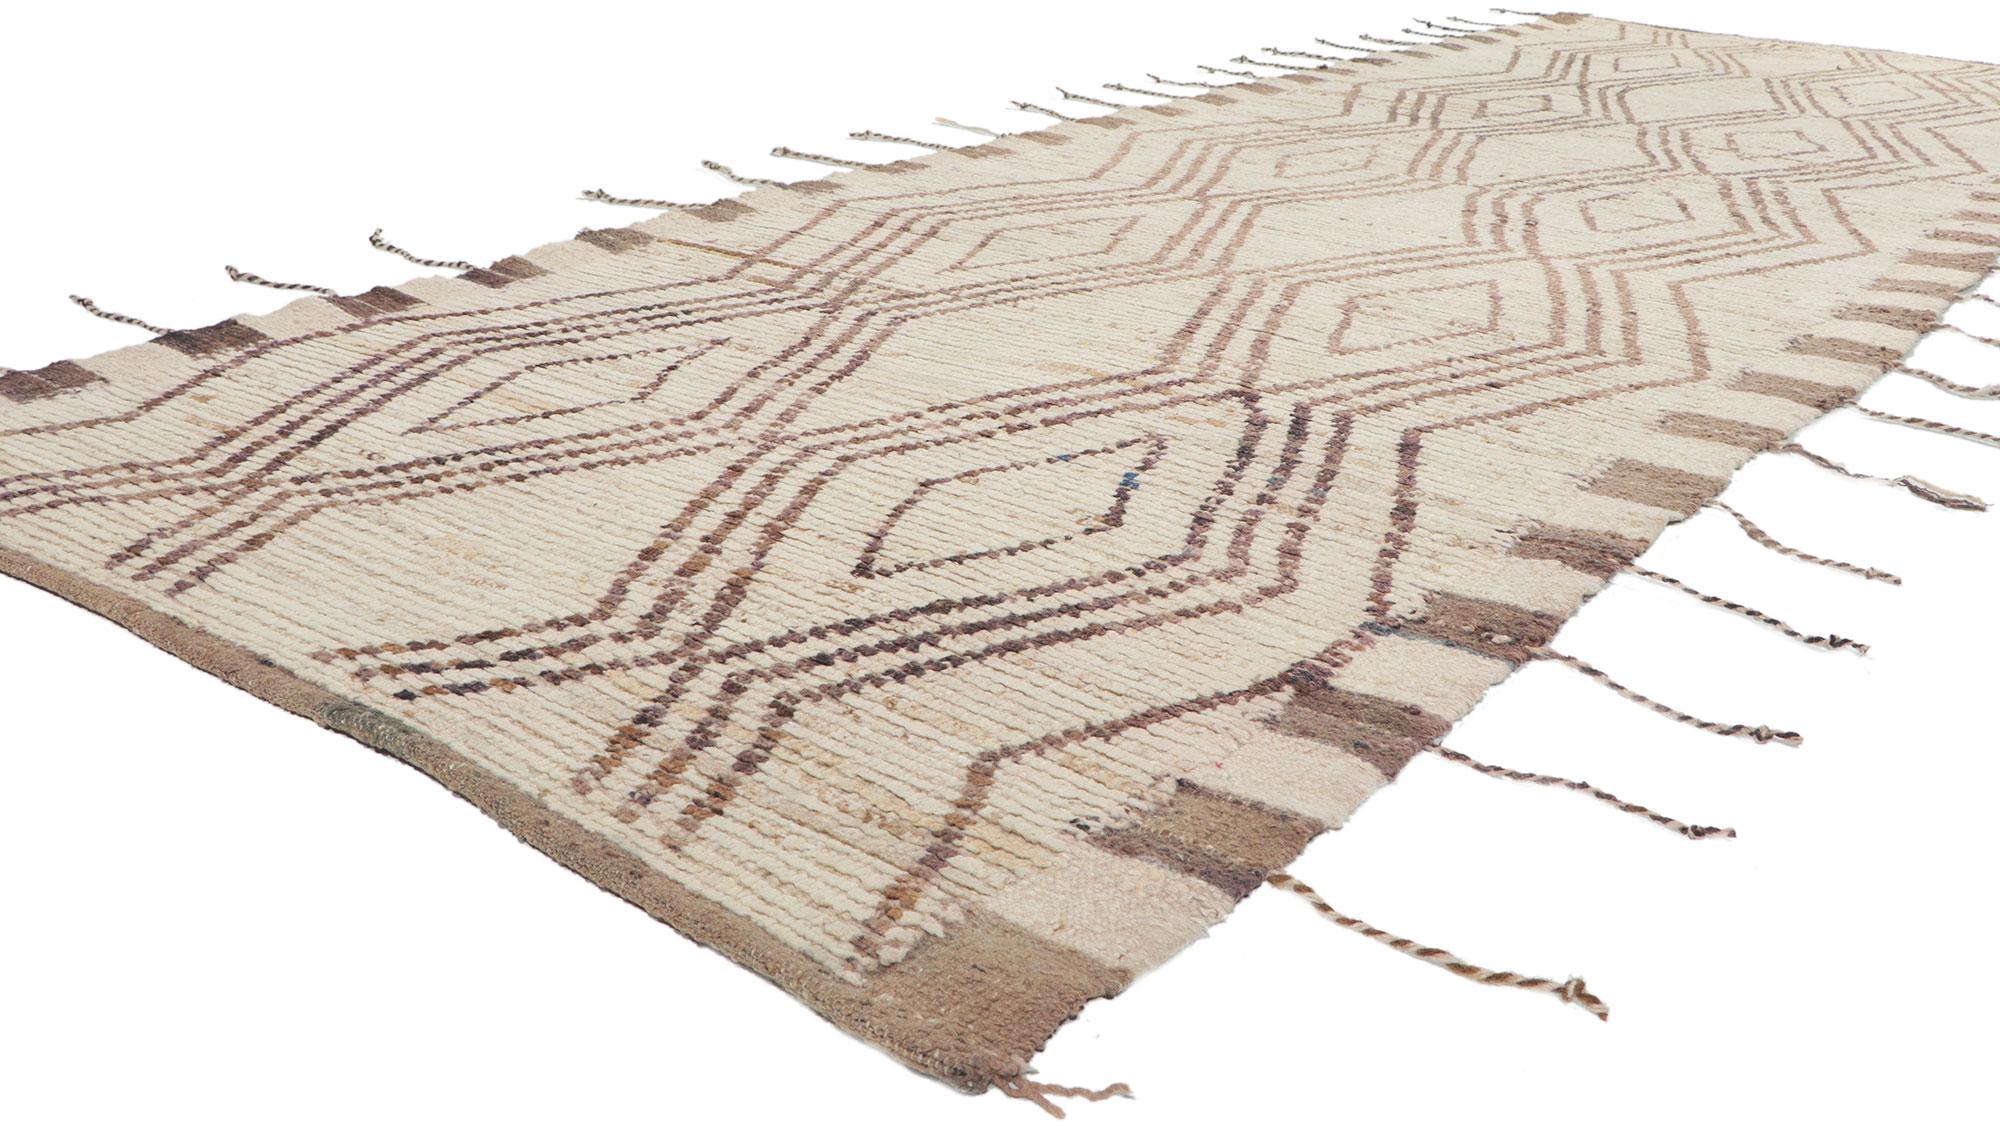 80780 New Contemporary Moroccan runner, 04'10 x 15'05. With its modern style, incredible detail and texture, this hand knotted wool contemporary Moroccan runner is a captivating vision of woven beauty. The tribal pattern and earthy colorway woven